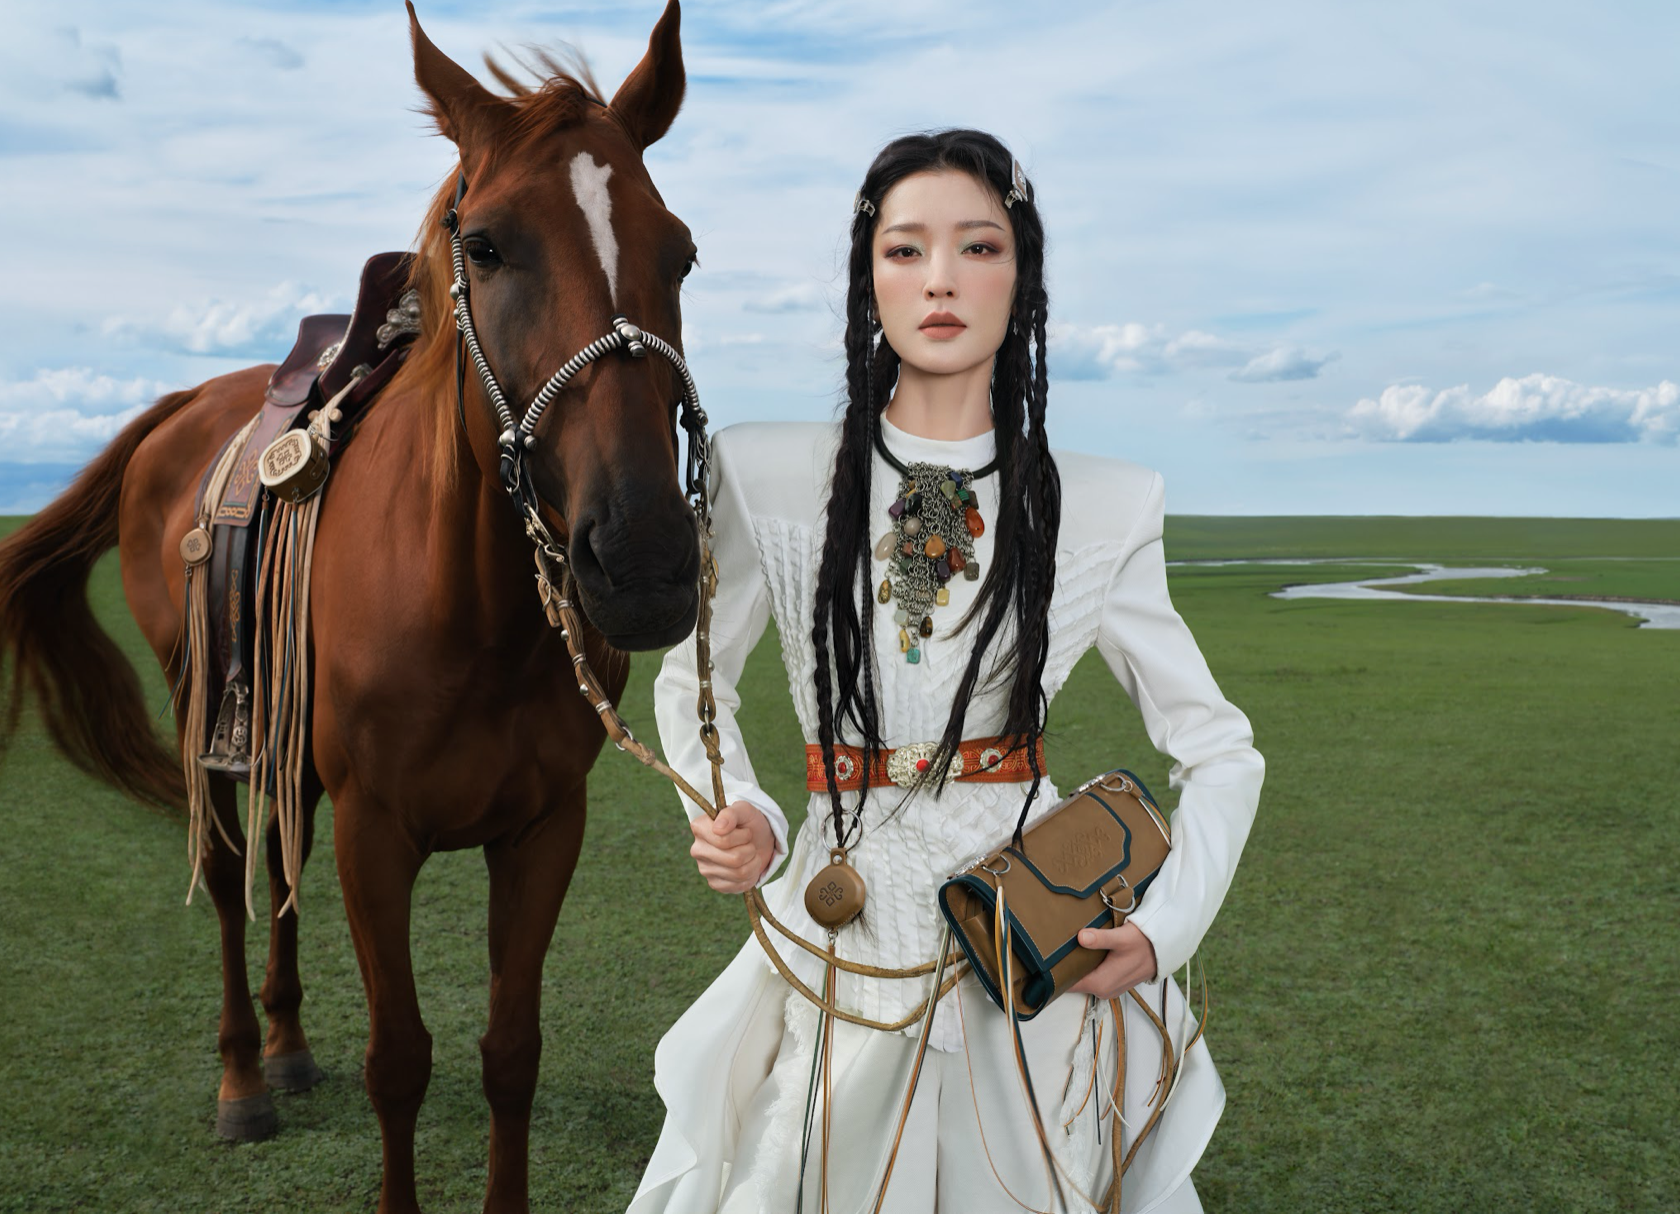 Florasis’ recent “Nomadic Glam” campaign featured its brand ambassador and supermodel Du Juan galloping across the vast and serene Mongolian grassland. Image: Florasis